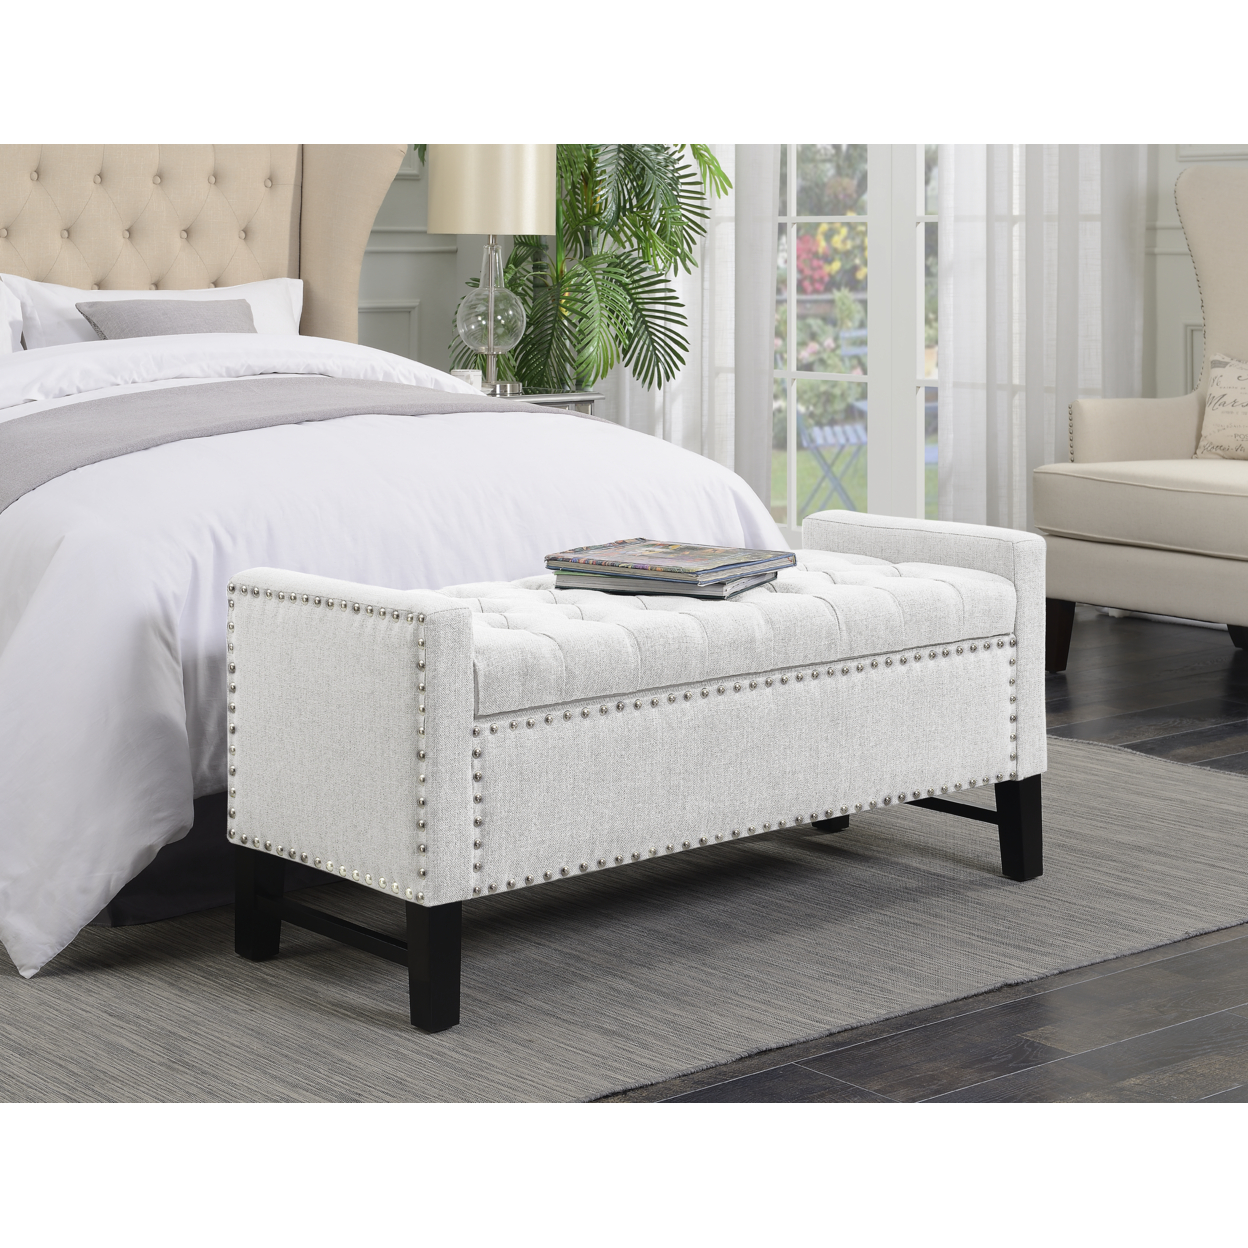 Michael Linen Modern Contemporary Button Tufted With Silver Nailheads Deco On Frame Storage Lid Bench - Linen Cream